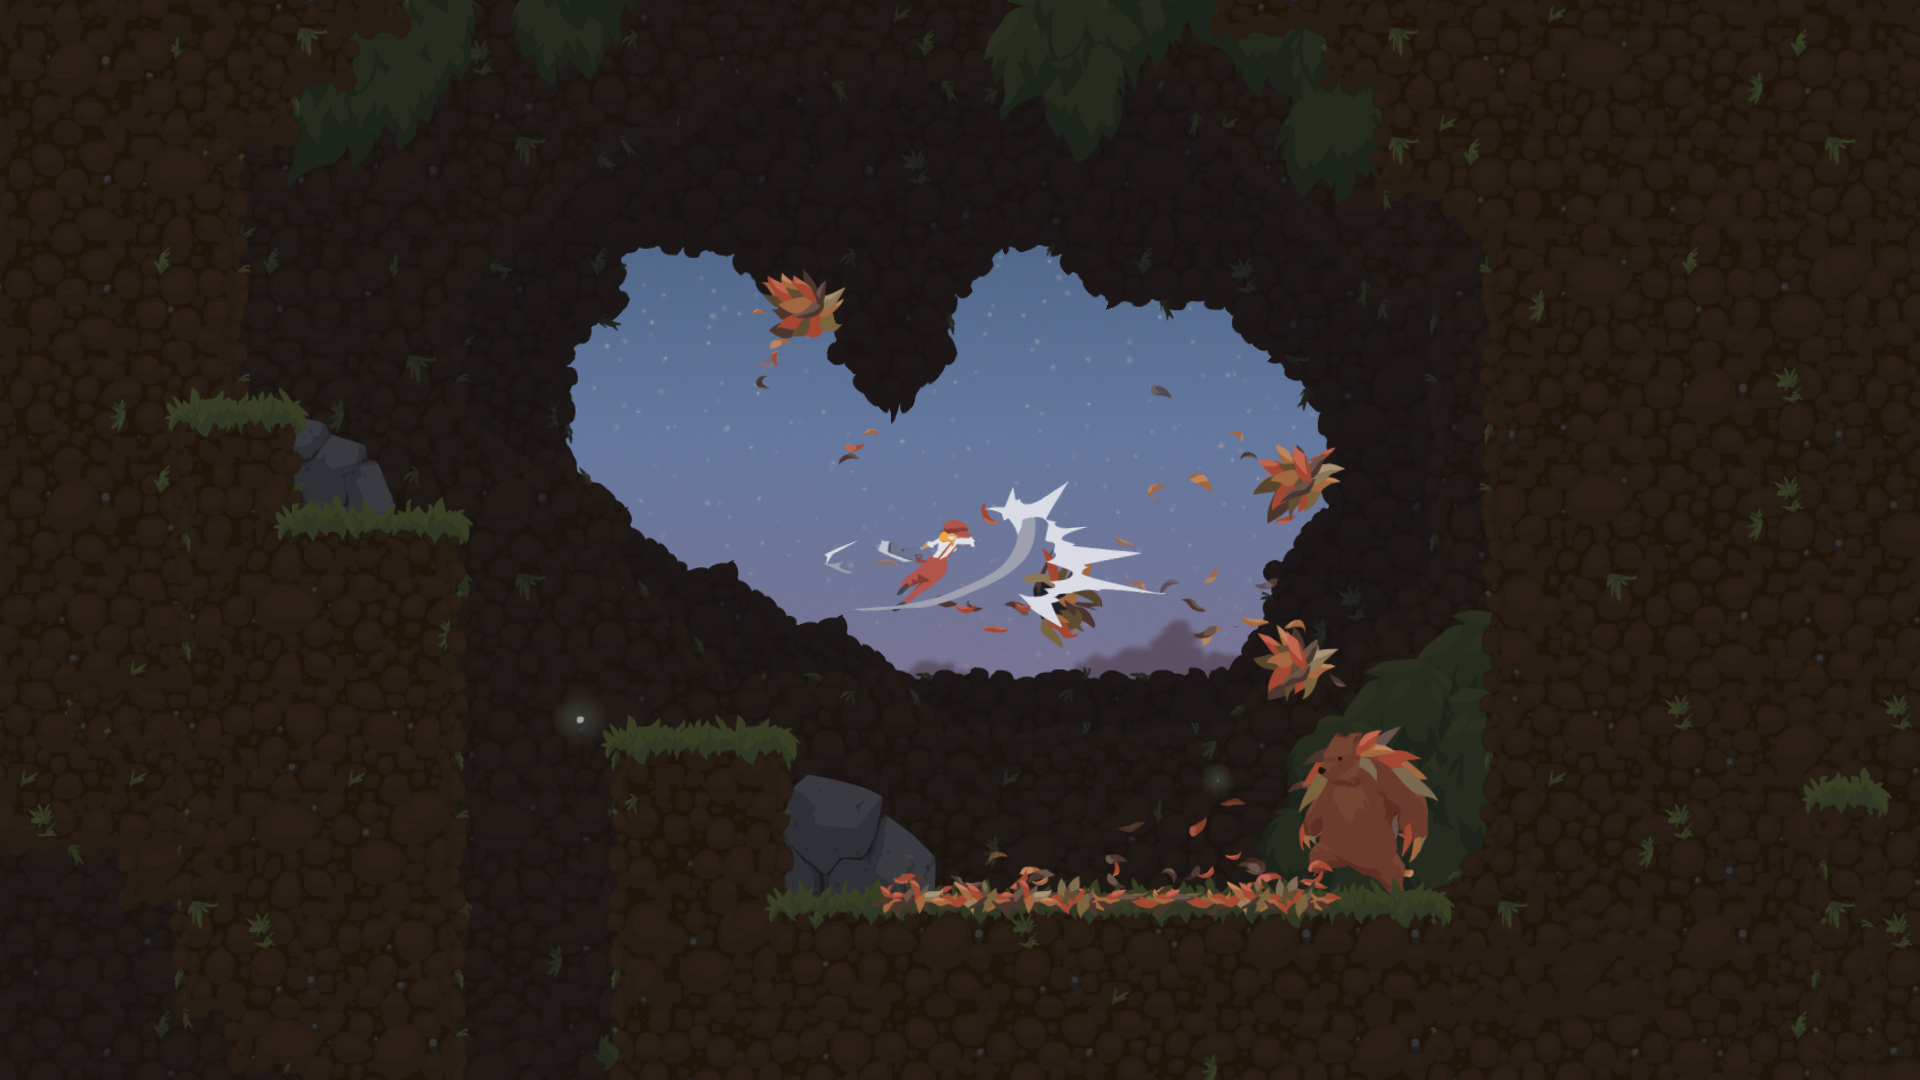 dustforce dx character differences